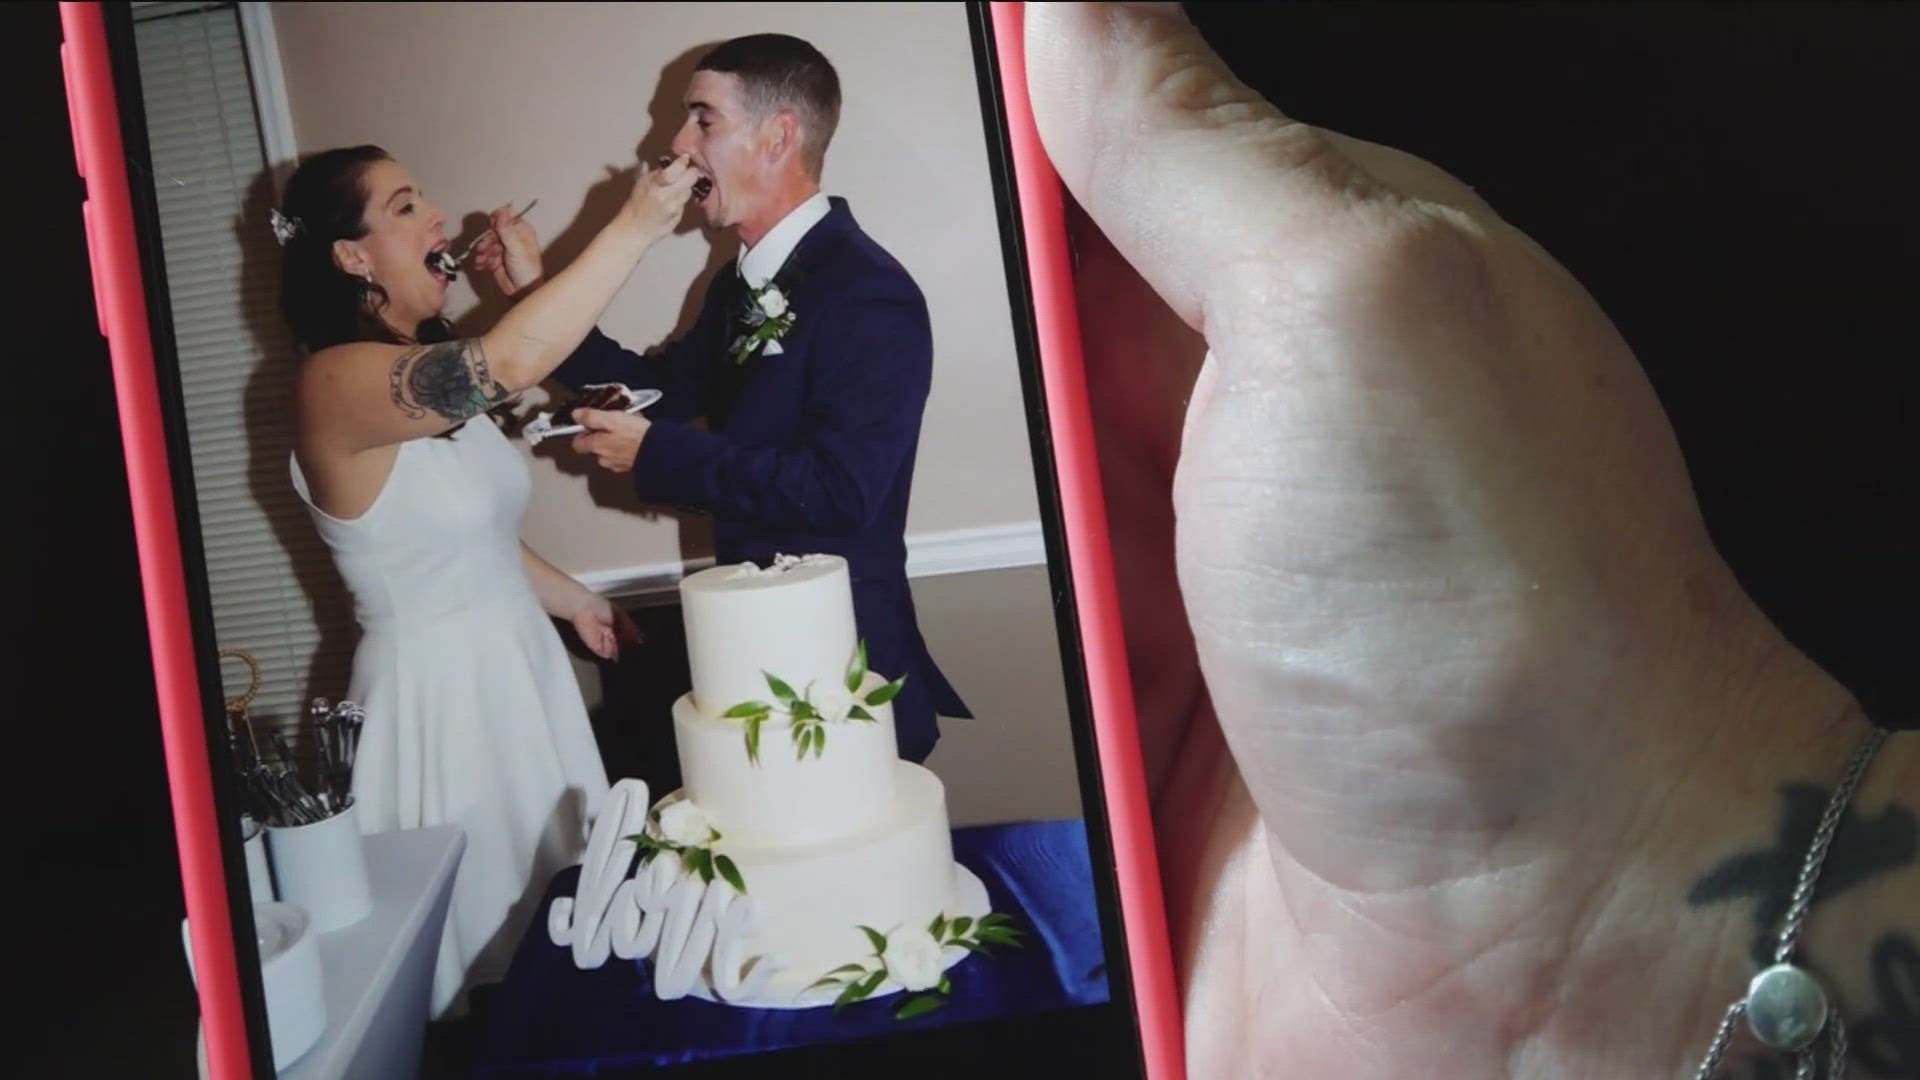 Allison Gardner planned the wedding day of her dreams but she said her photographer canceled two hours before she was scheduled to arrive.